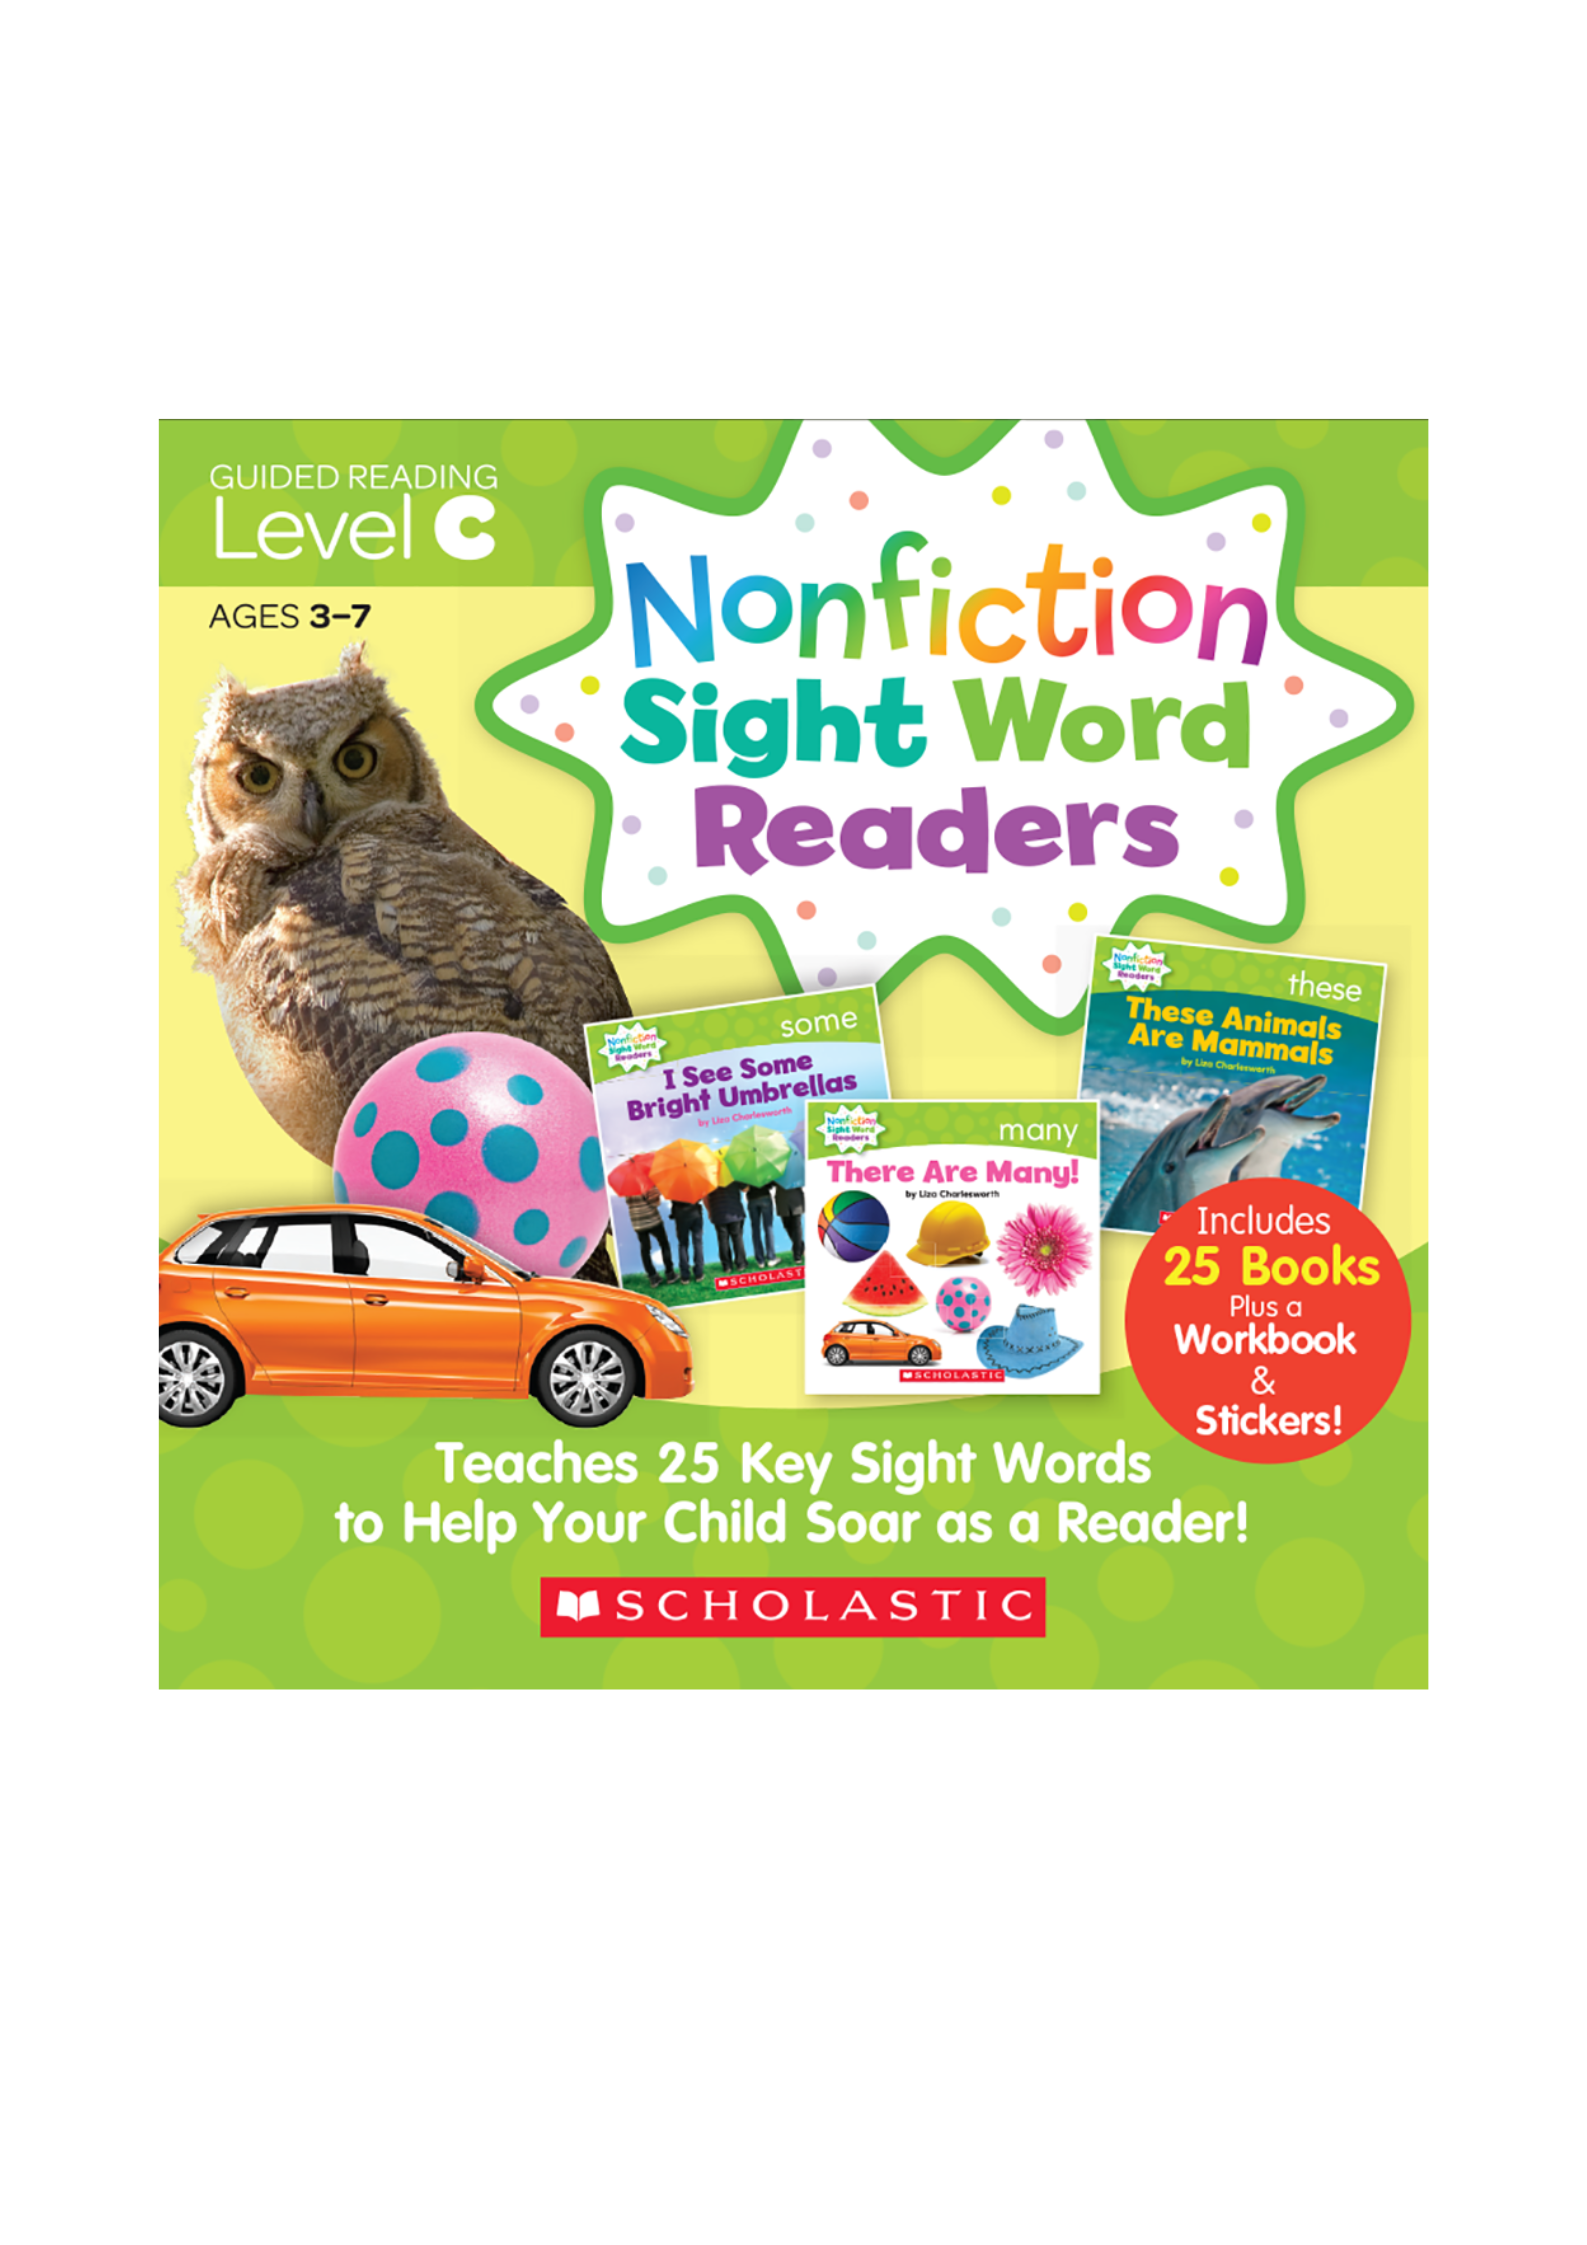 Nonfiction Sight Word Readers Level C